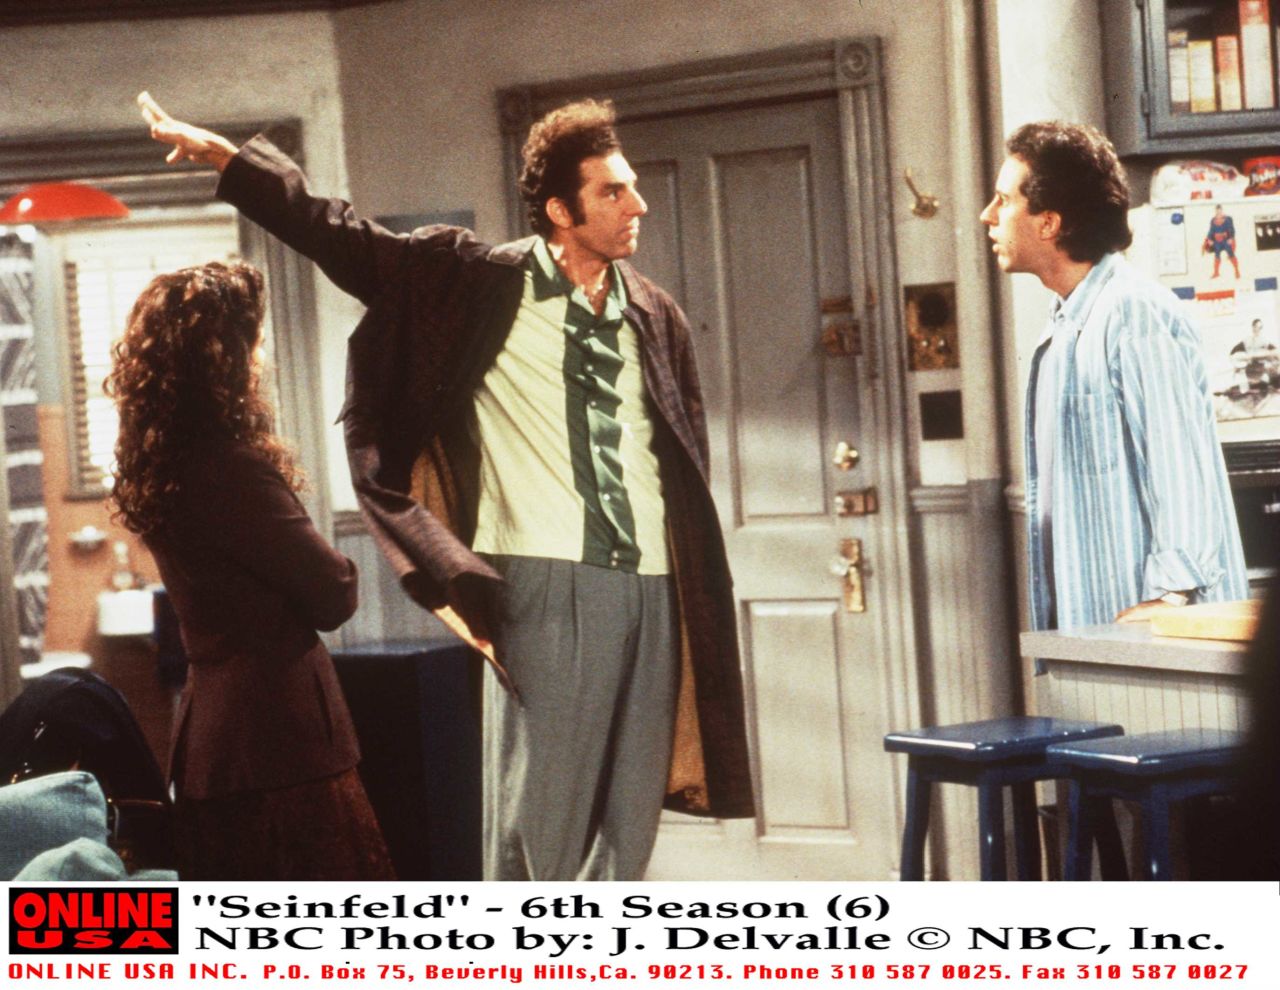 "Seinfeld" inspired a cult-like following usually reserved for science fiction TV series. Between the Junior Mints, the "yada-yada," Elaine's crazy dancing and Festivus, there were many memorable moments. The show also stands the test of time in reruns.